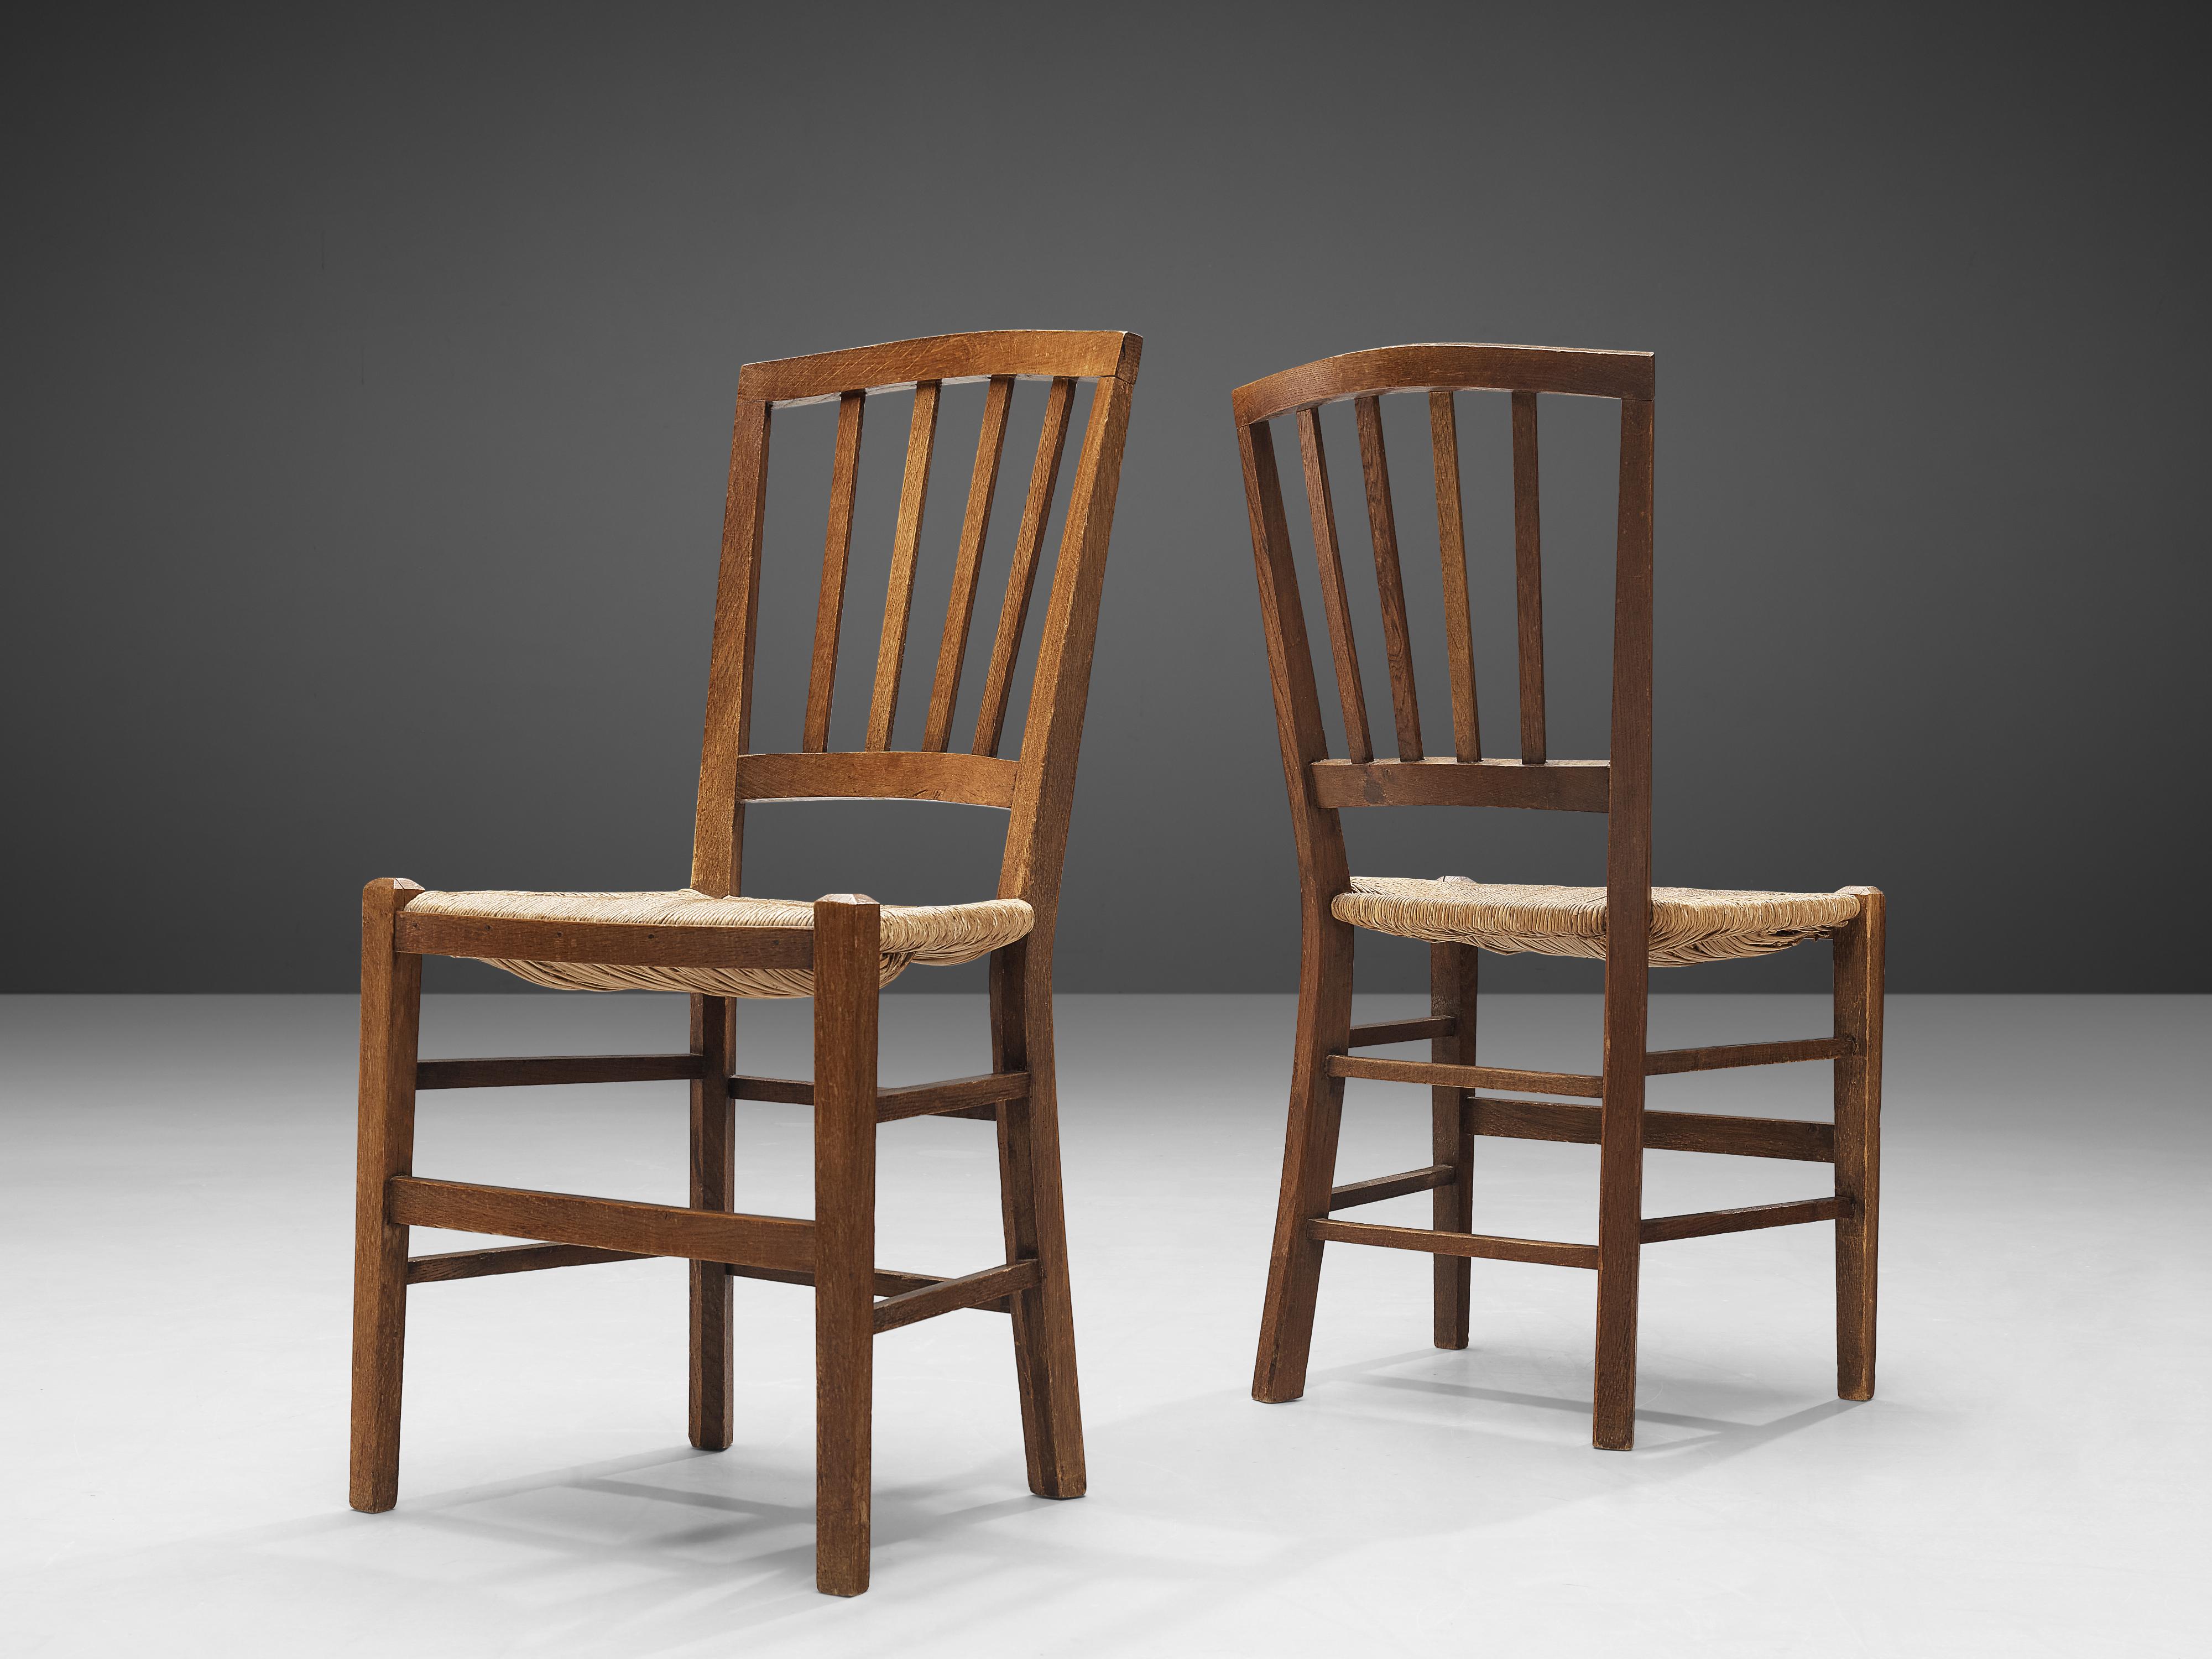 Mid-20th Century Dutch Dining Chairs in Stained Oak and Paper Cord Seating